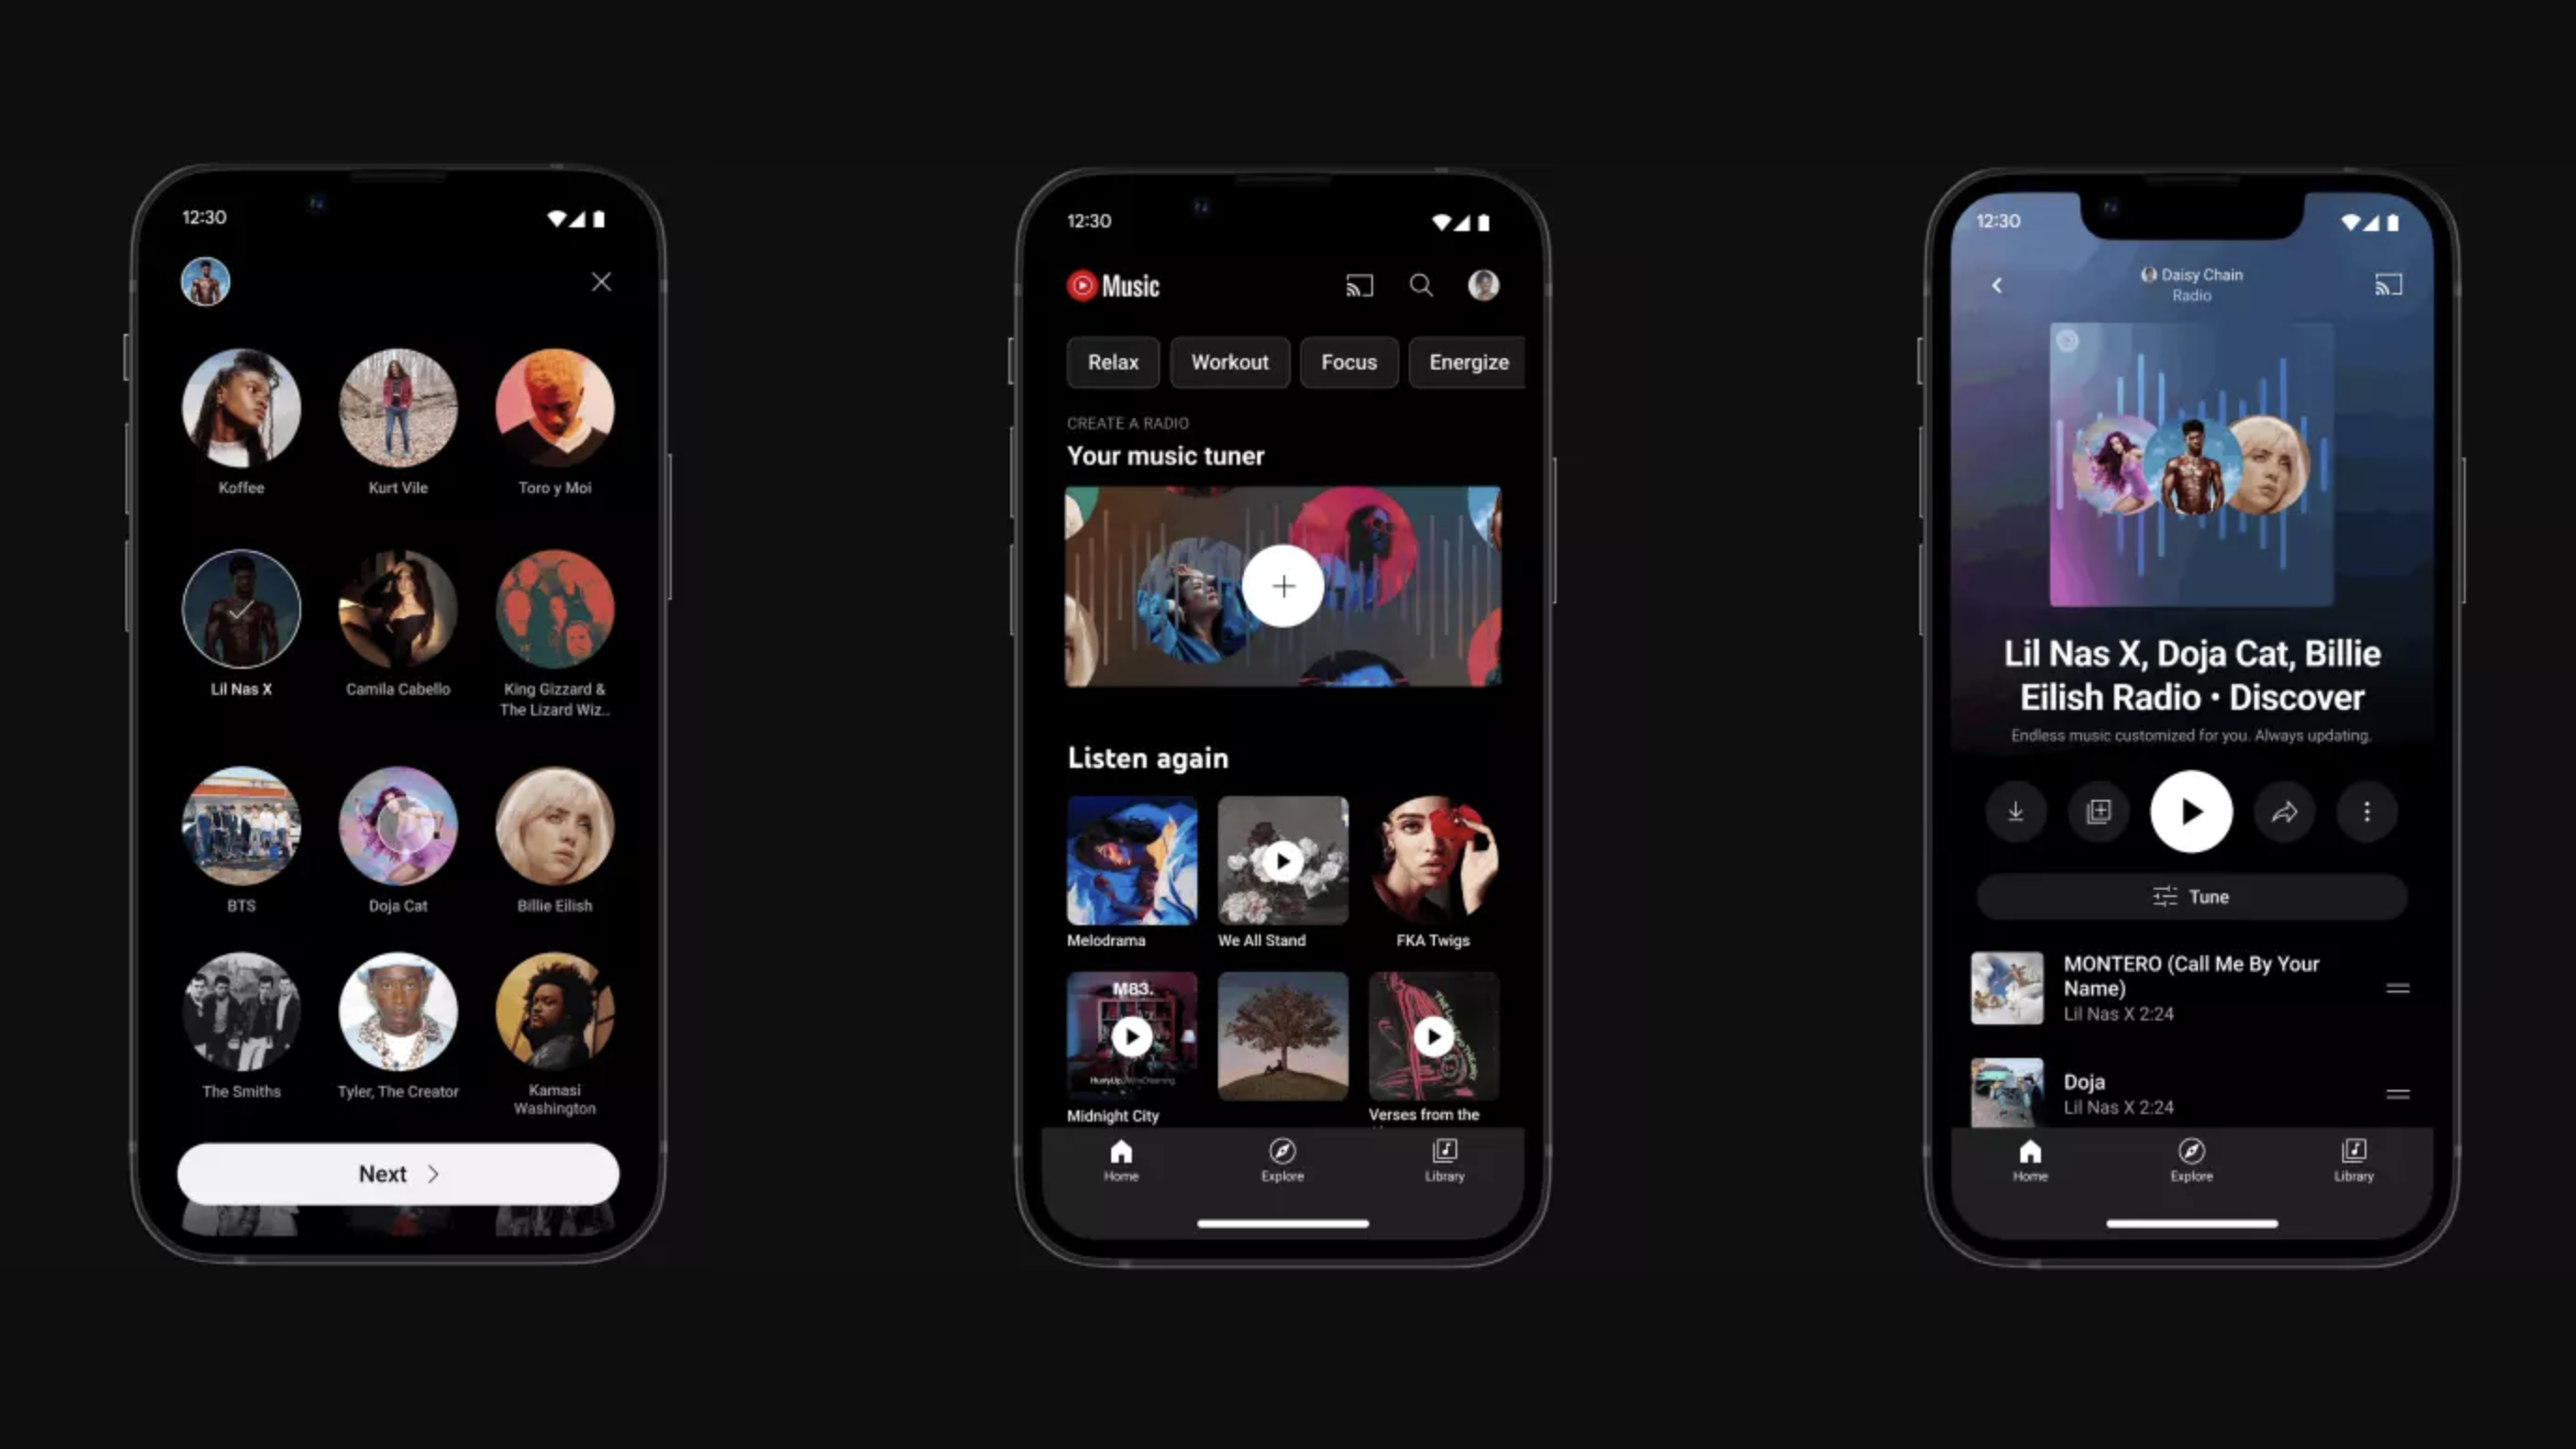 Screenshots of the YouTube Music app on a smartphone.